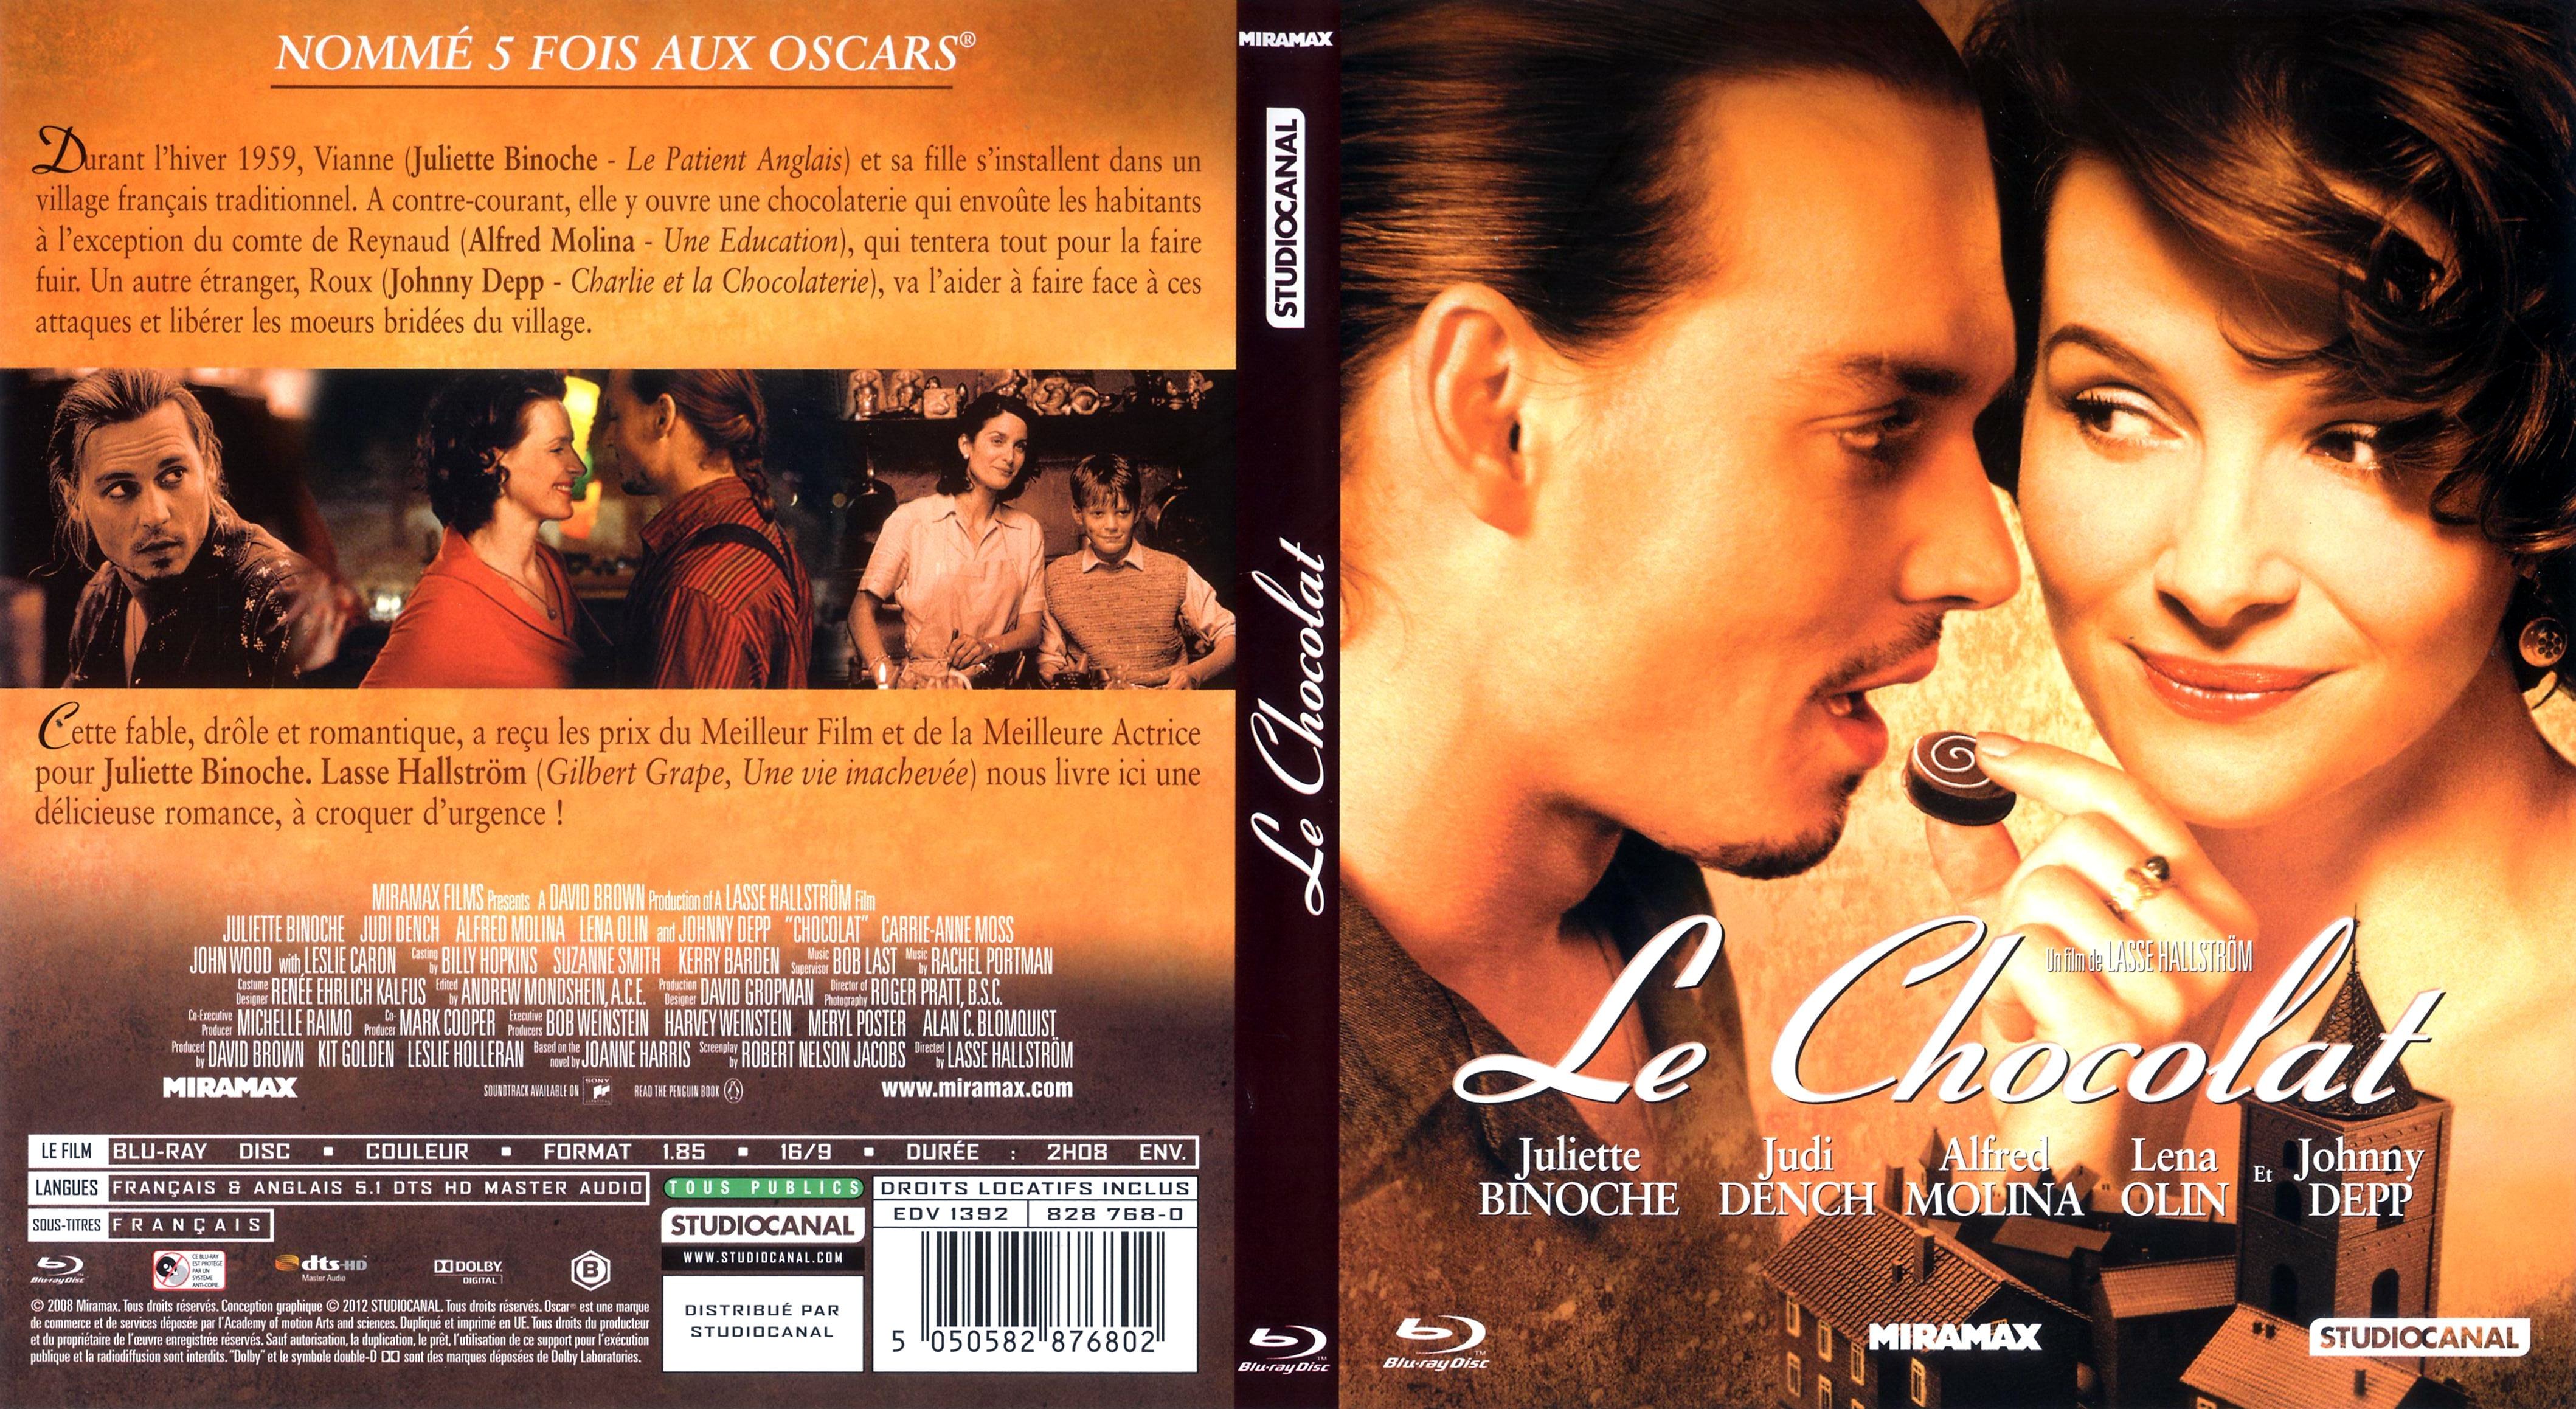 Jaquette DVD Le chocolat (BLU-RAY)